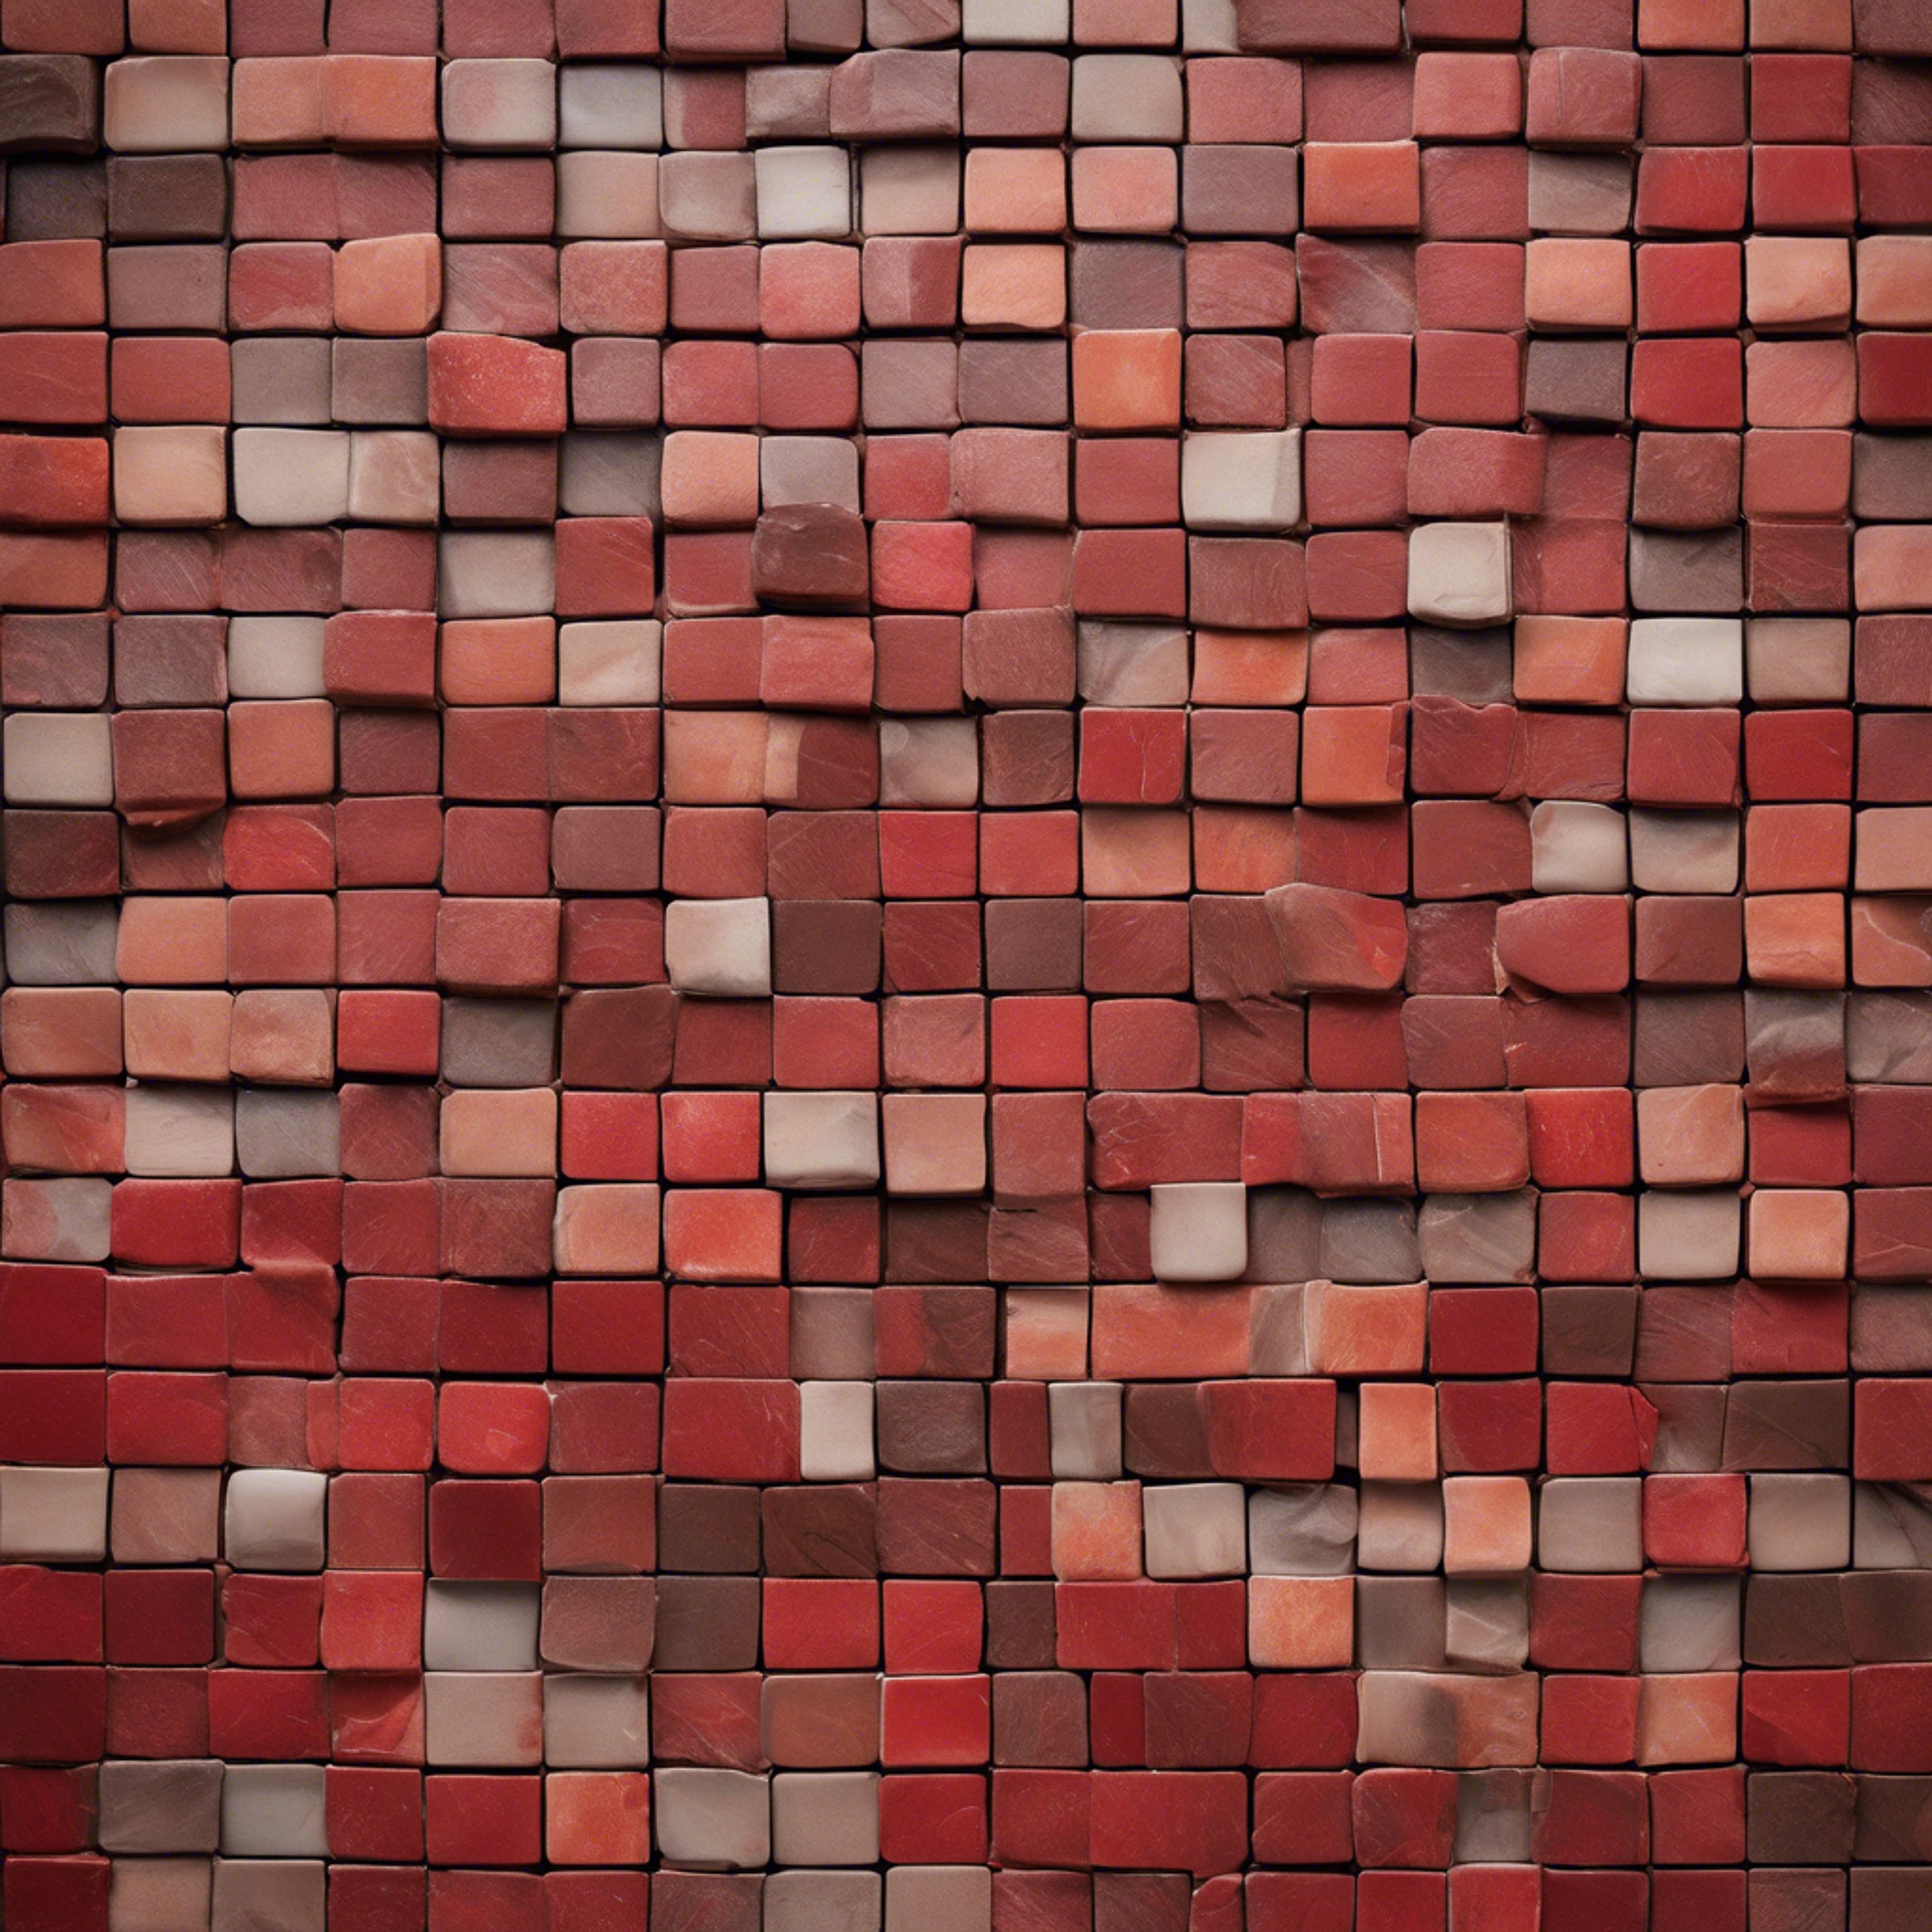 A tessellation of vibrant red and rustic brown tiles in an abstract, mosaic fashion. Wallpaper[f218a12c4957439fa899]